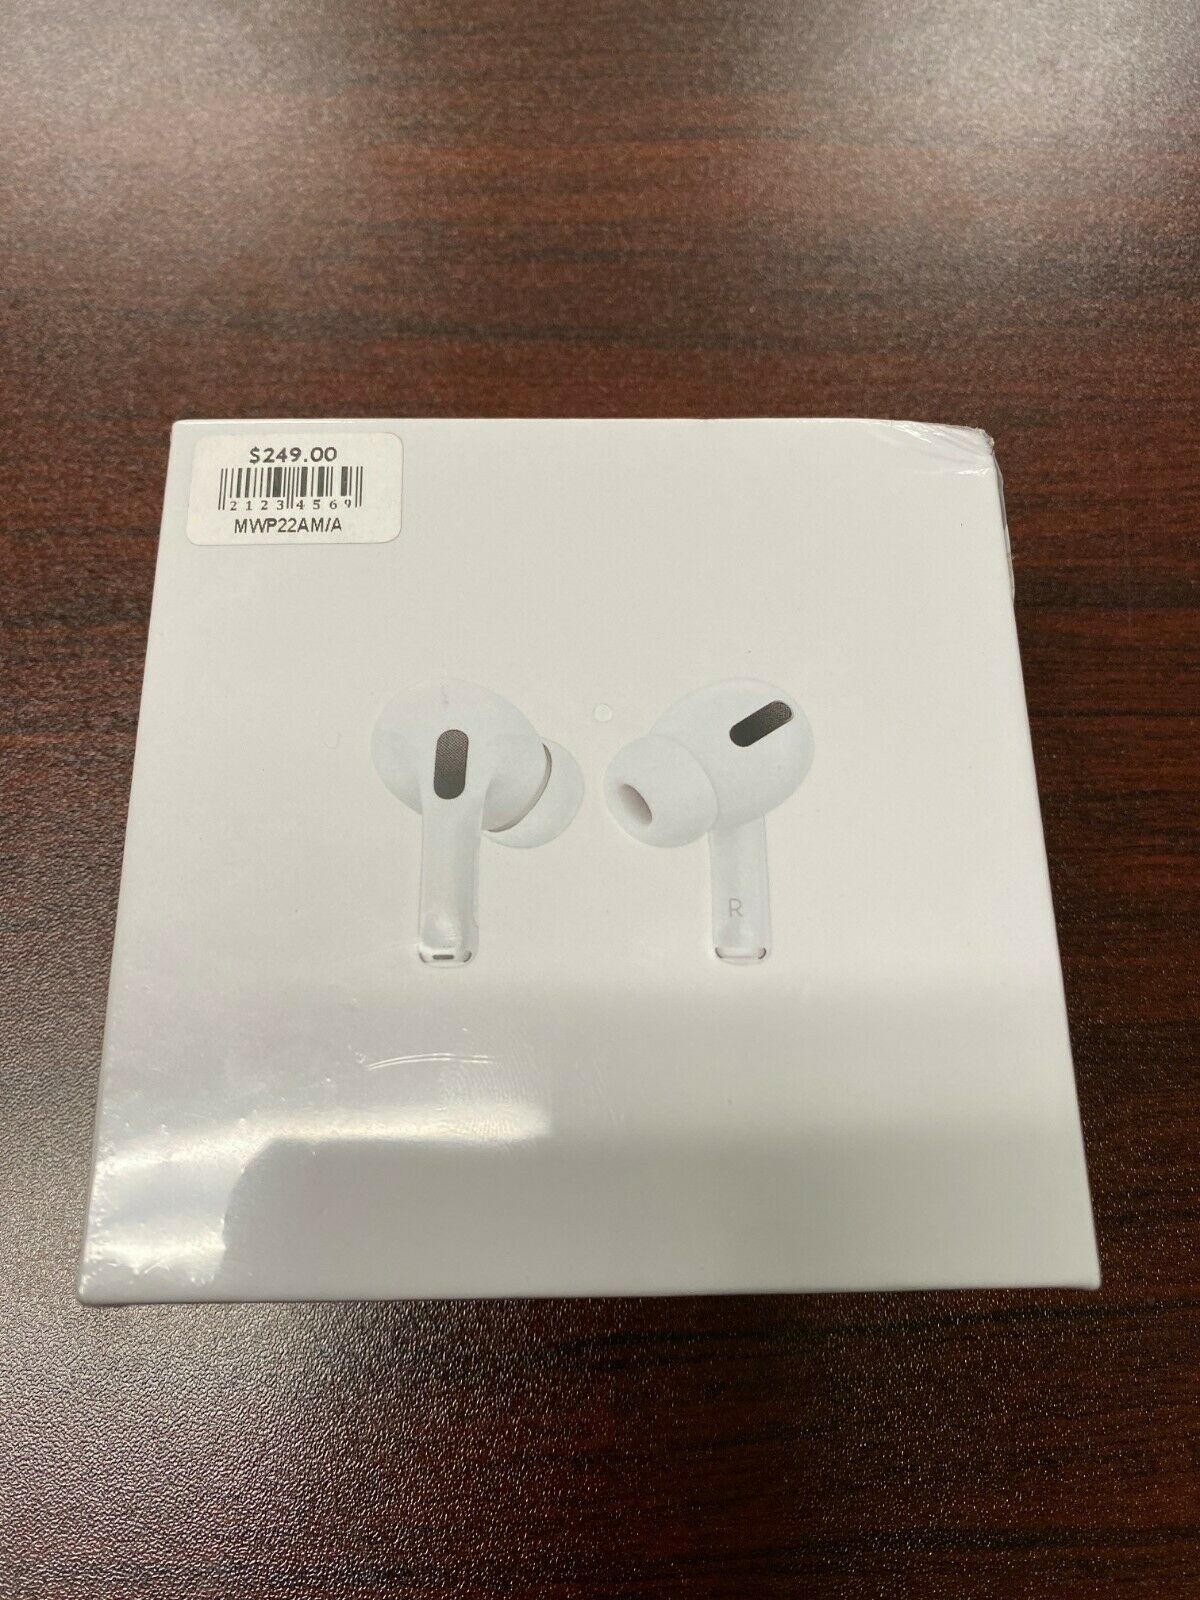 New Apple AirPods Pro with Wireless Charging Case MWP22AM/A (serial # verified)